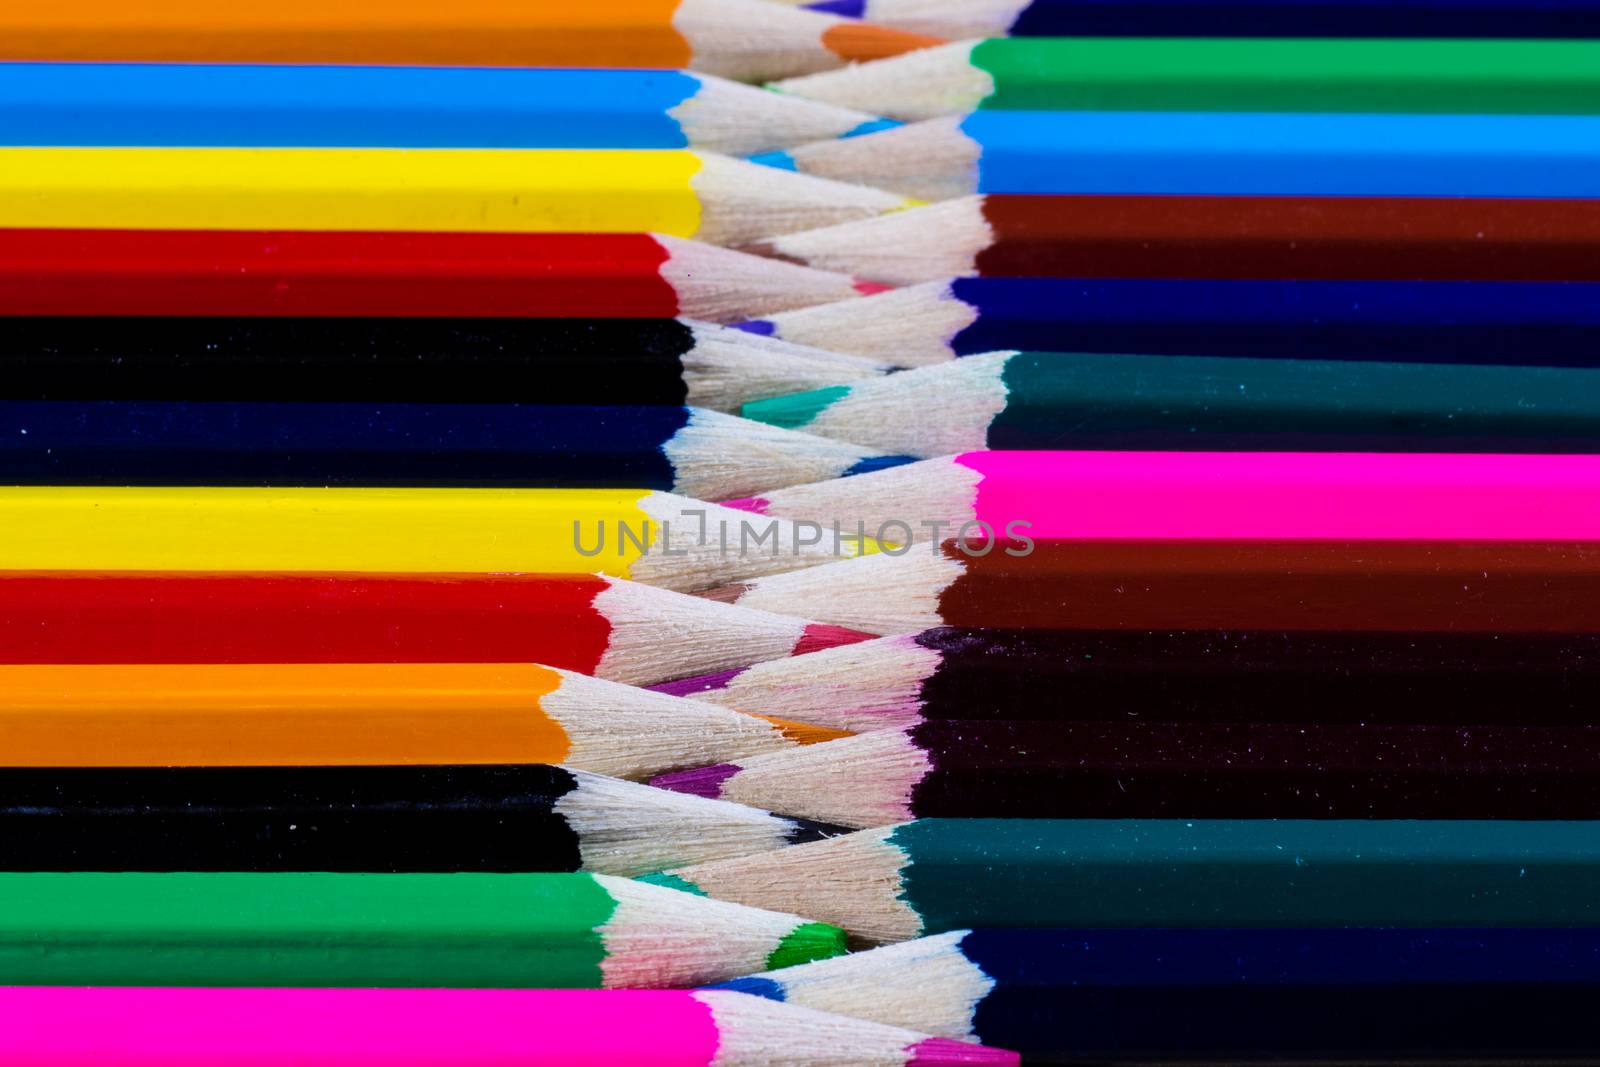 Beautiful and colorful pencil crayons. Wooden table. Black background.